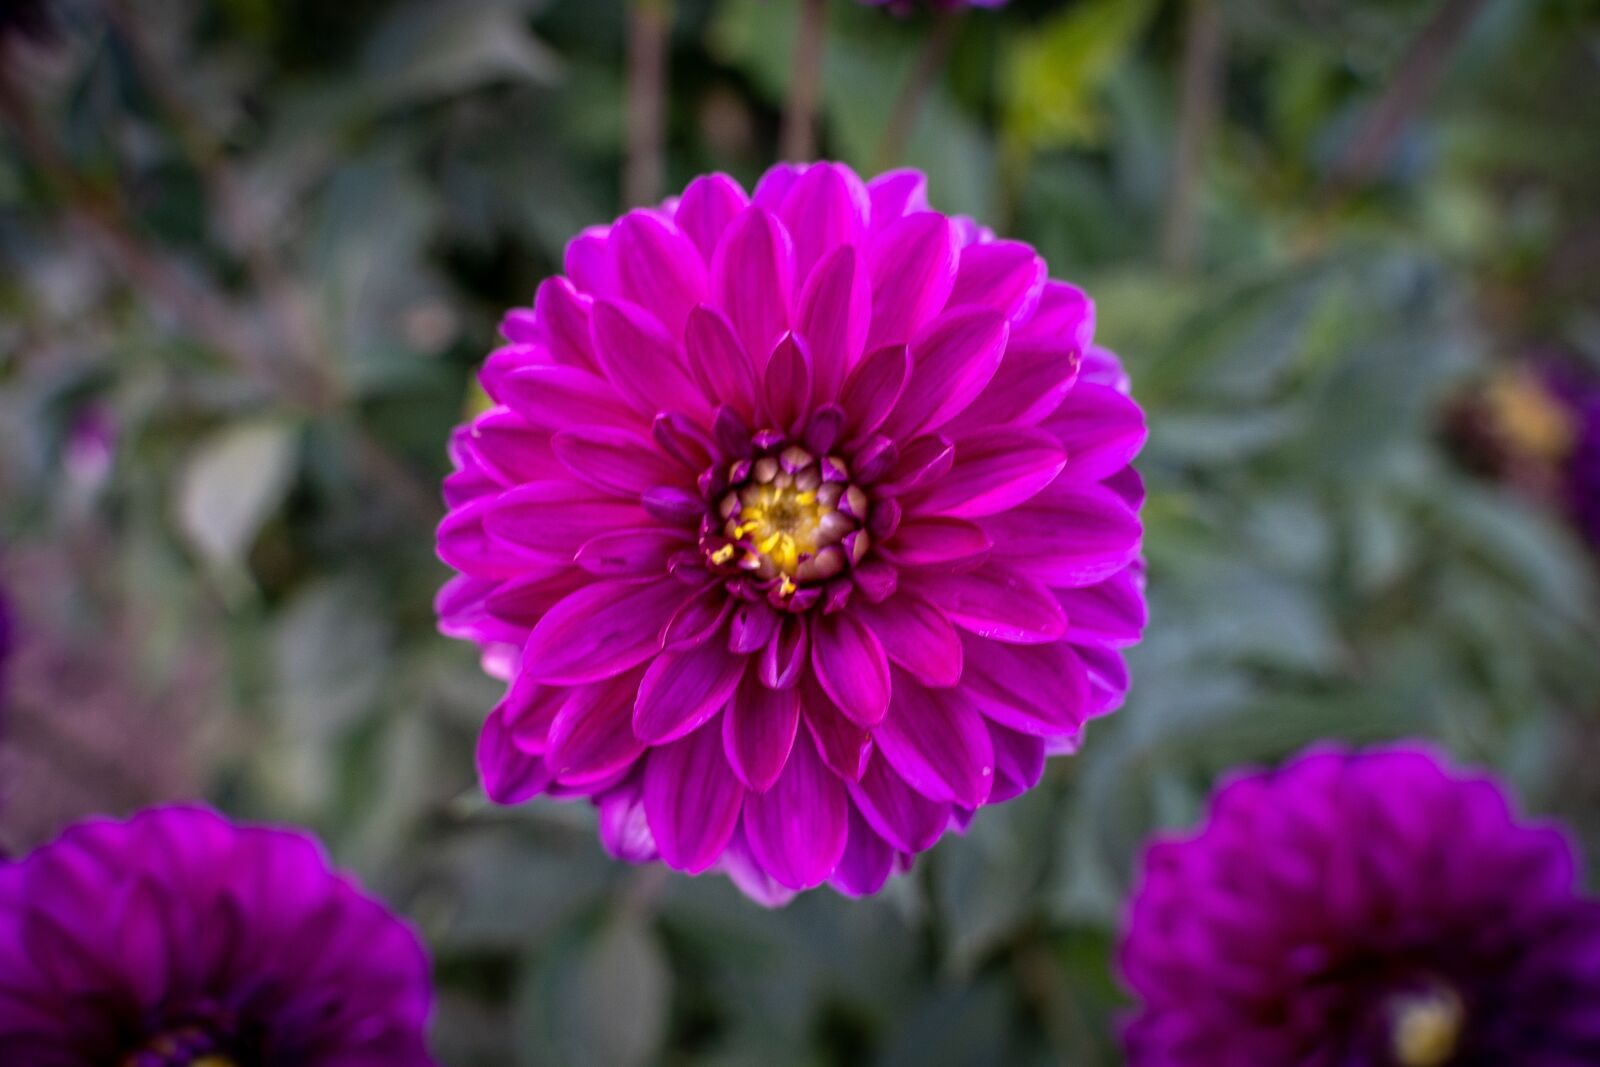 Sony a7 III sample photo. Flowers, bloom, plant photography